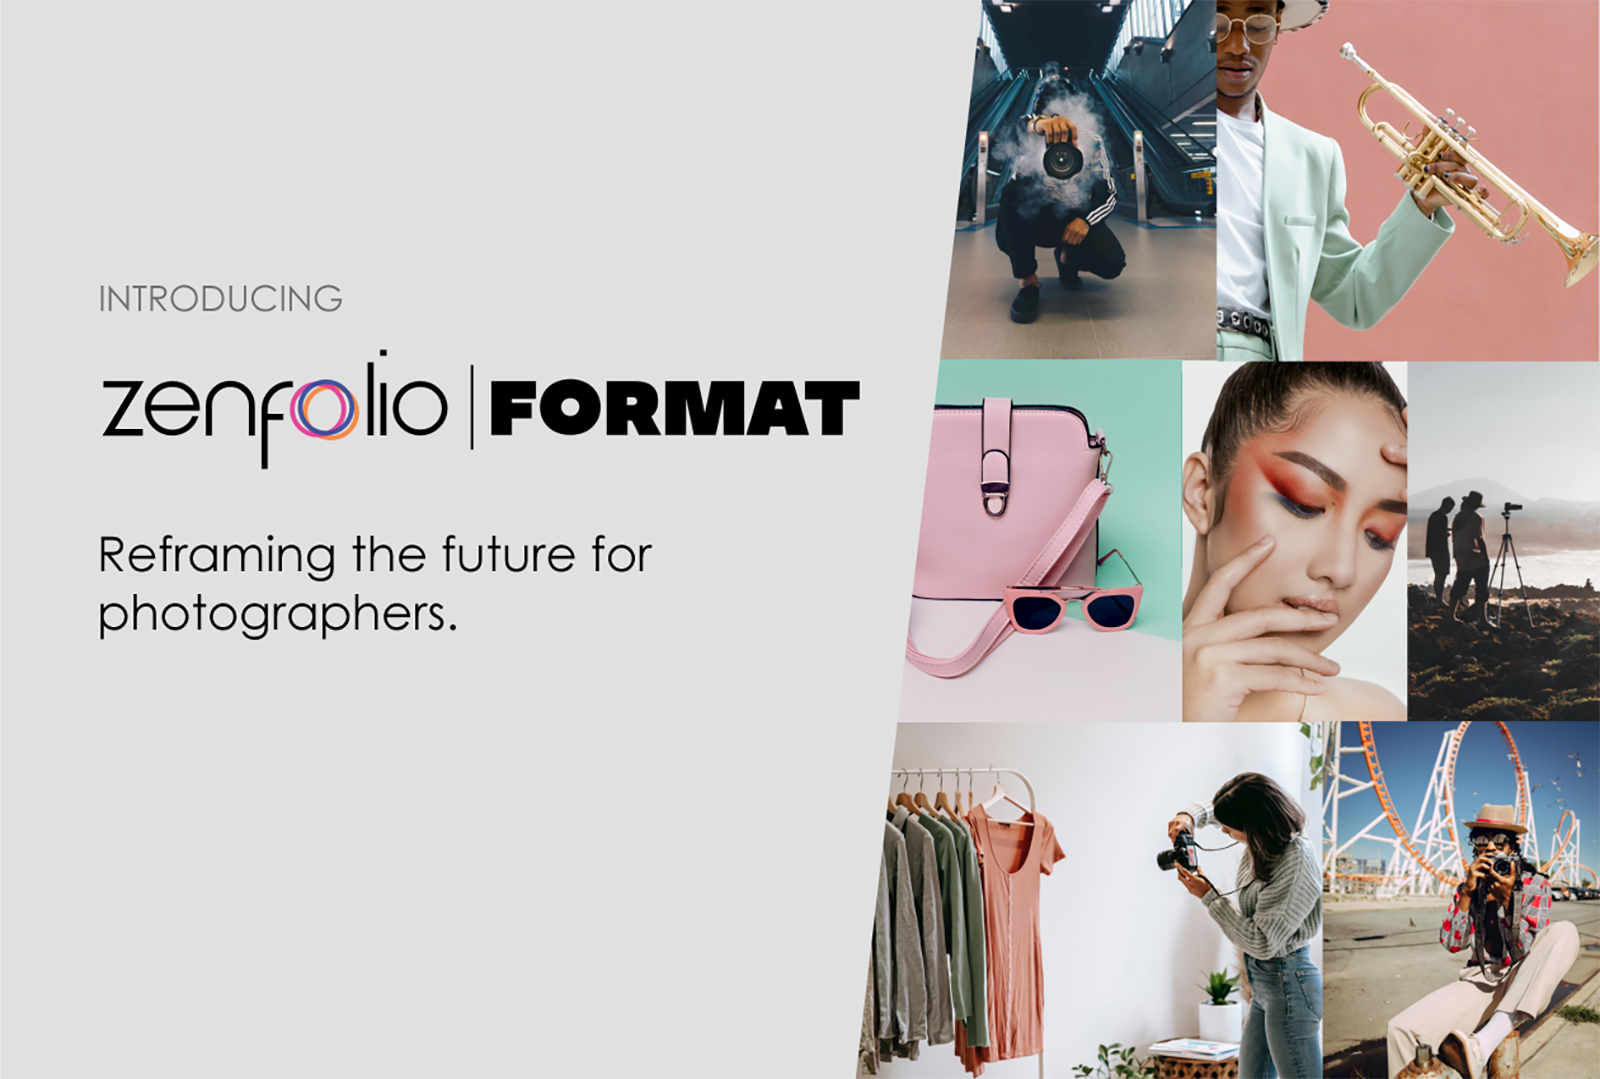 Zenfolio, the leader in creative and business solutions for photographers